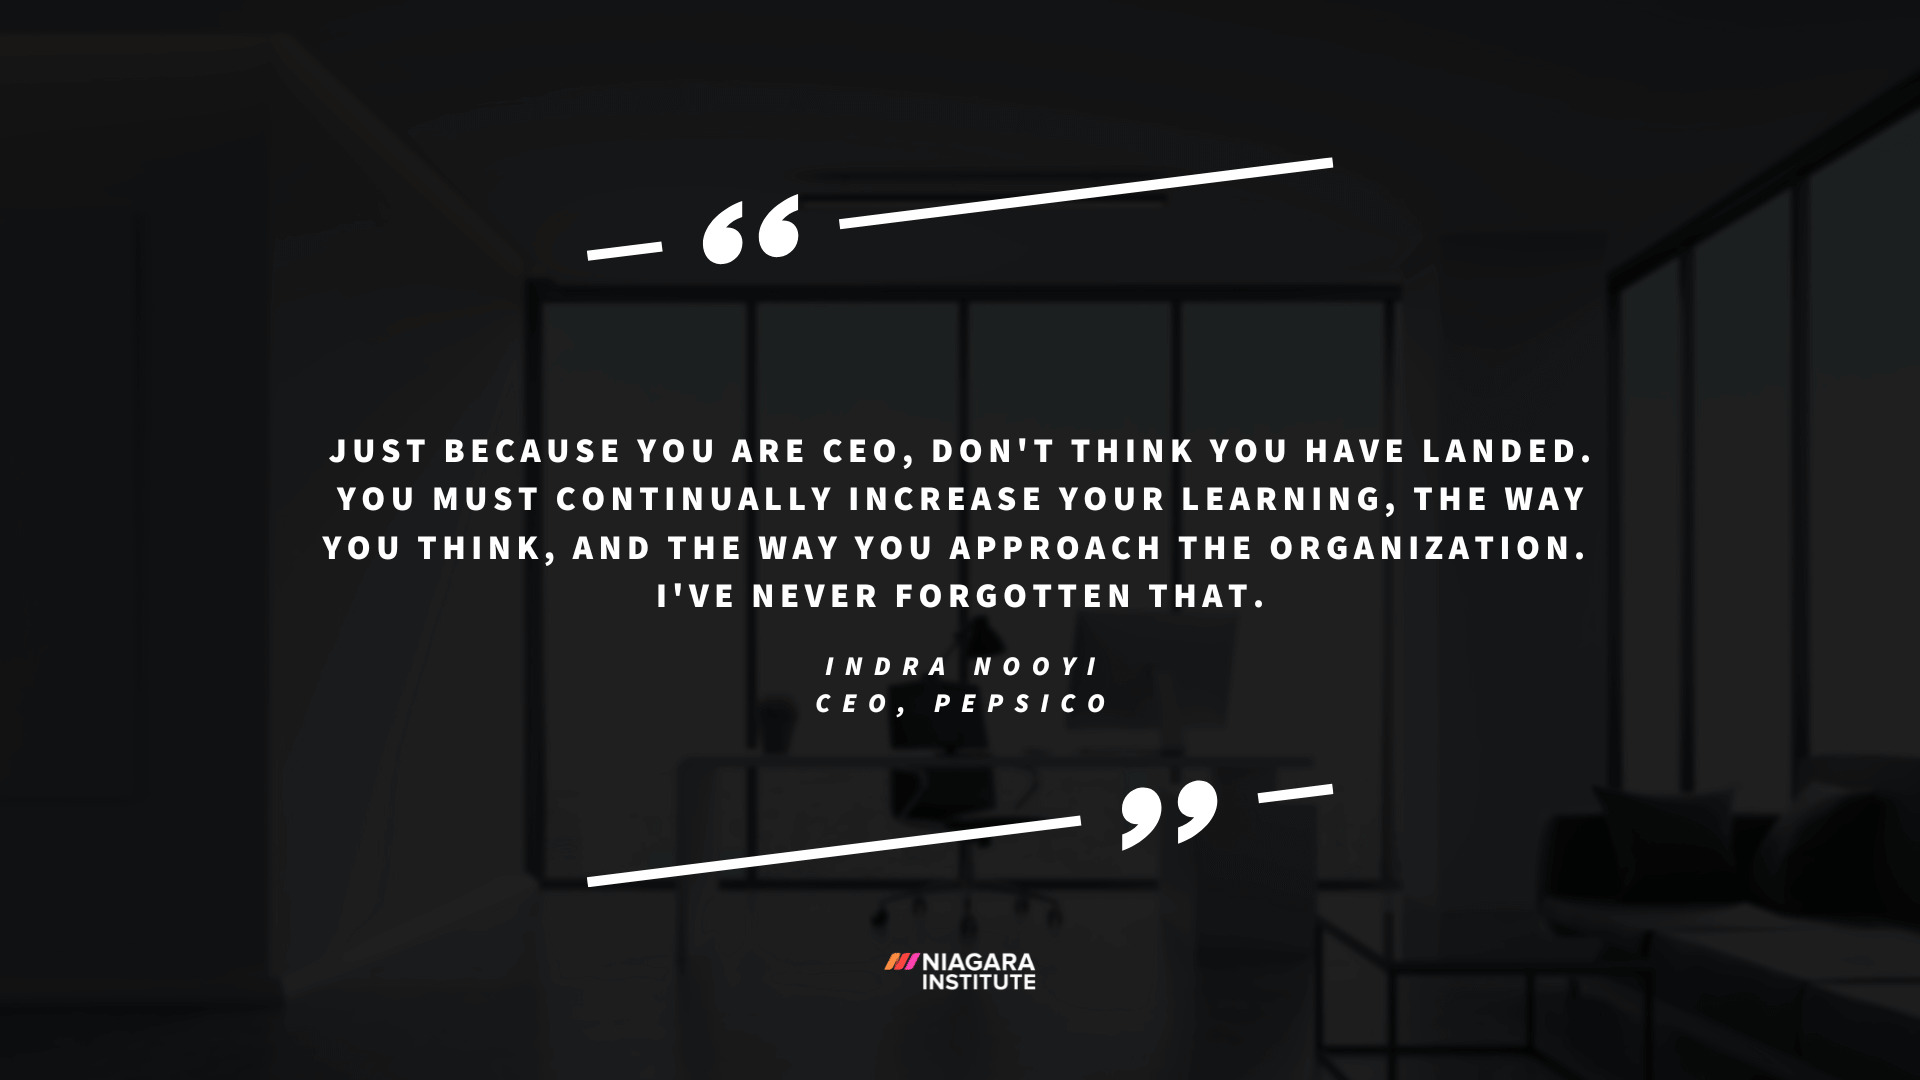 Inspiring Leadership Quotes About Lifelong Learning from Women Leaders in Business - Indra Nooyi, CEO PepsiCo  (1)